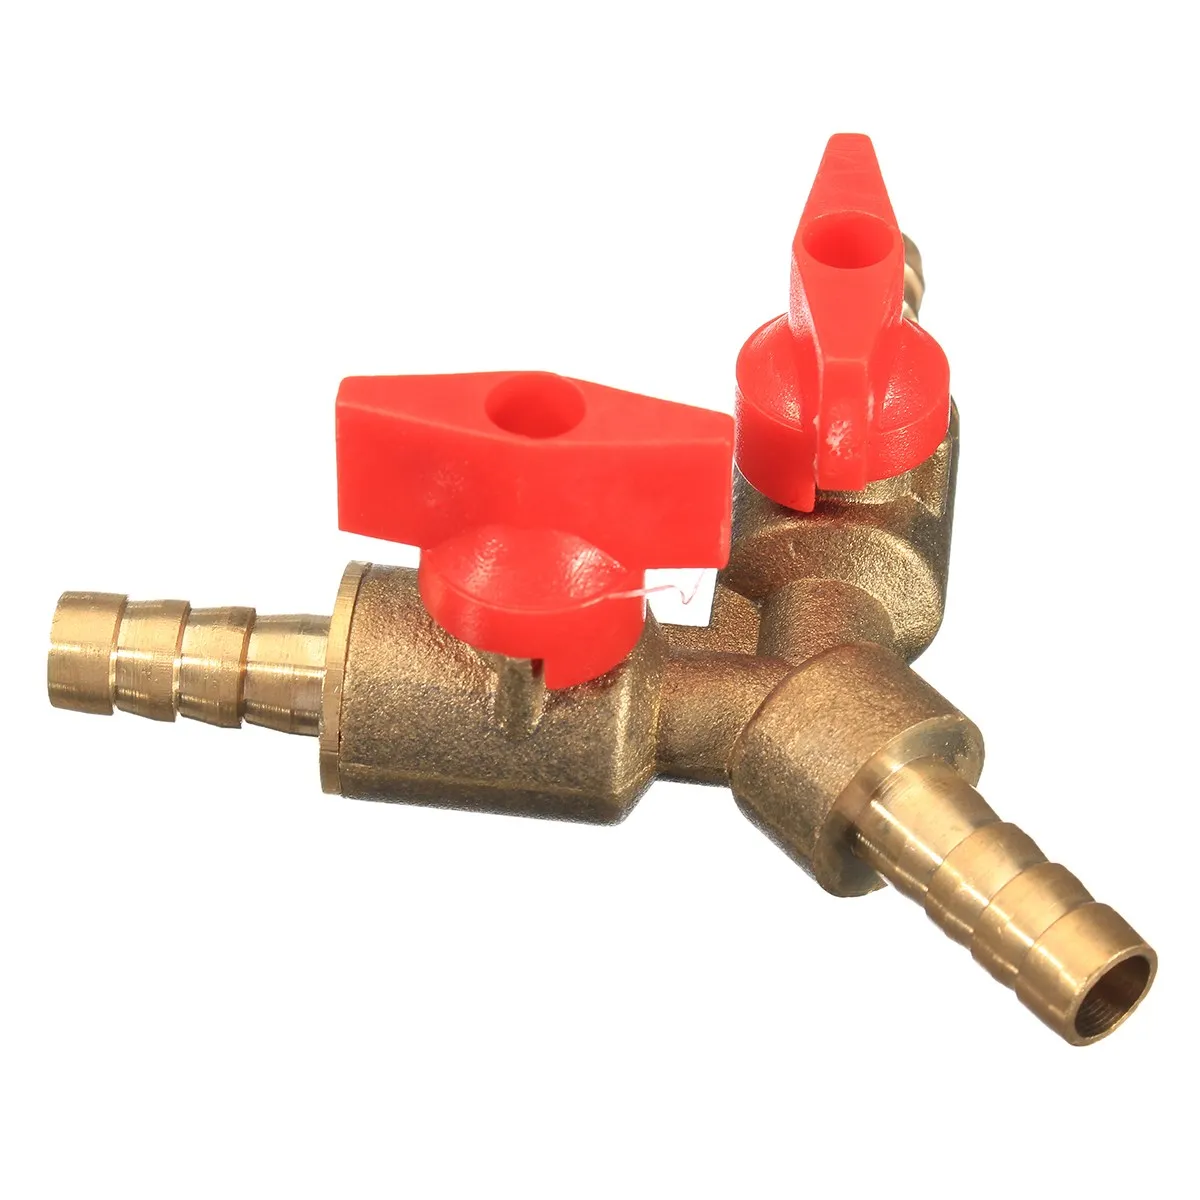 Clamp Tee Brass Y 3-Way Shut off Ball Valve Fitting Hose Fuel Gas 3/8" 10mm3 